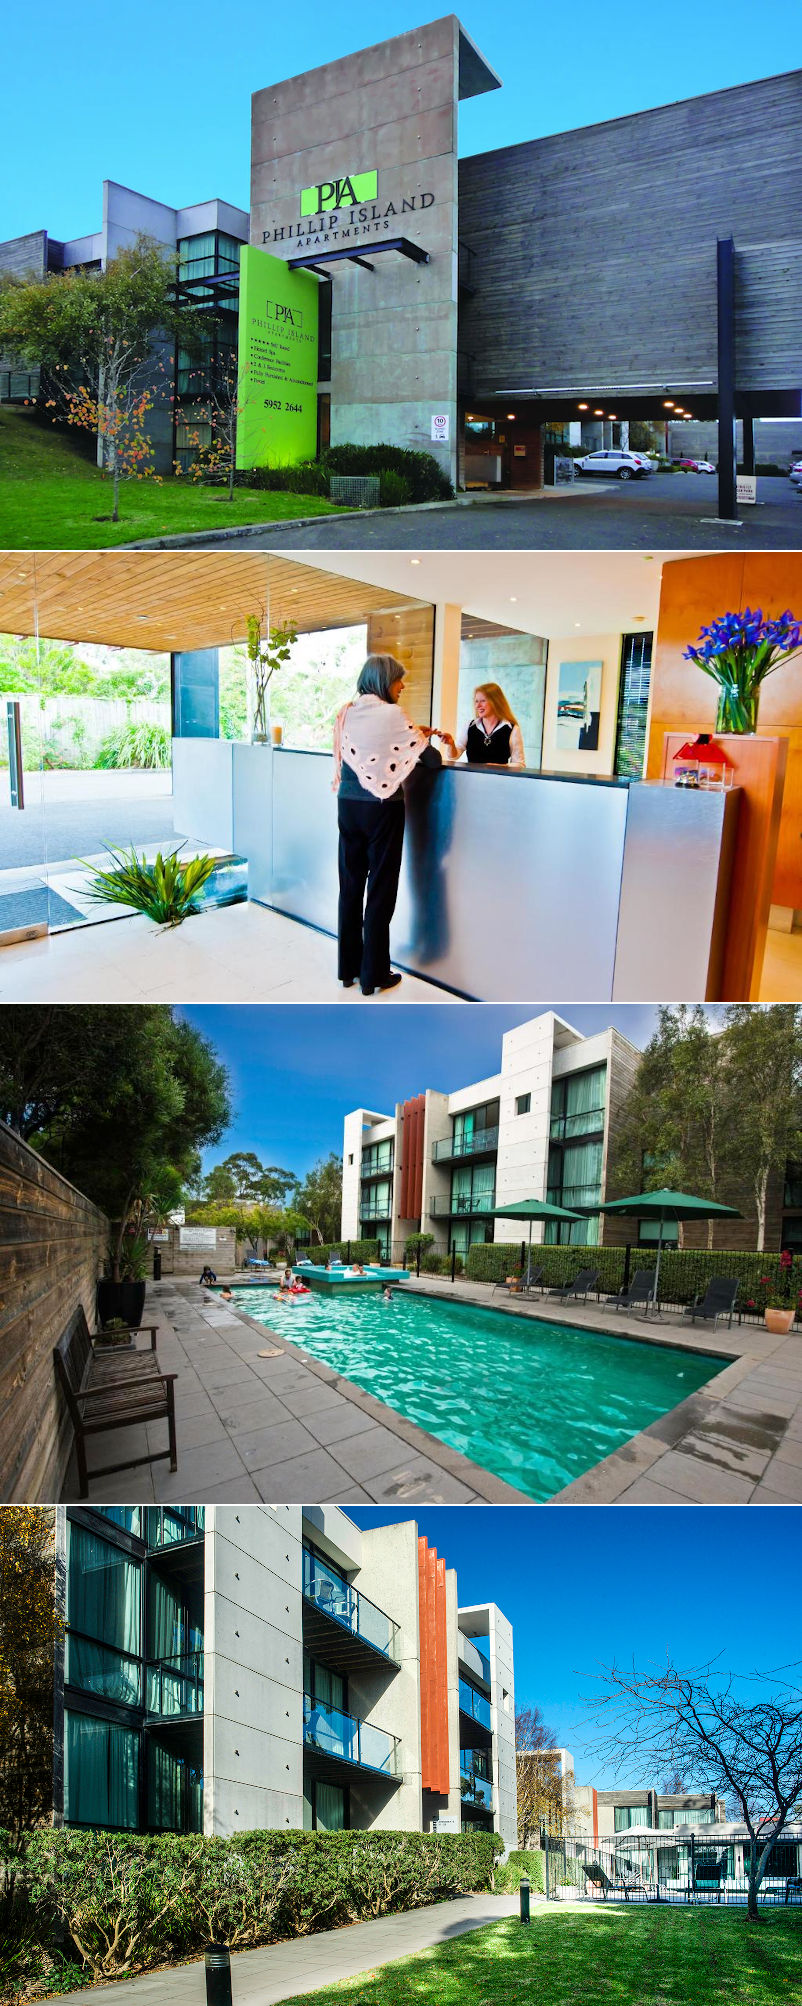 Phillip Island Apartments - Grounds and facilities